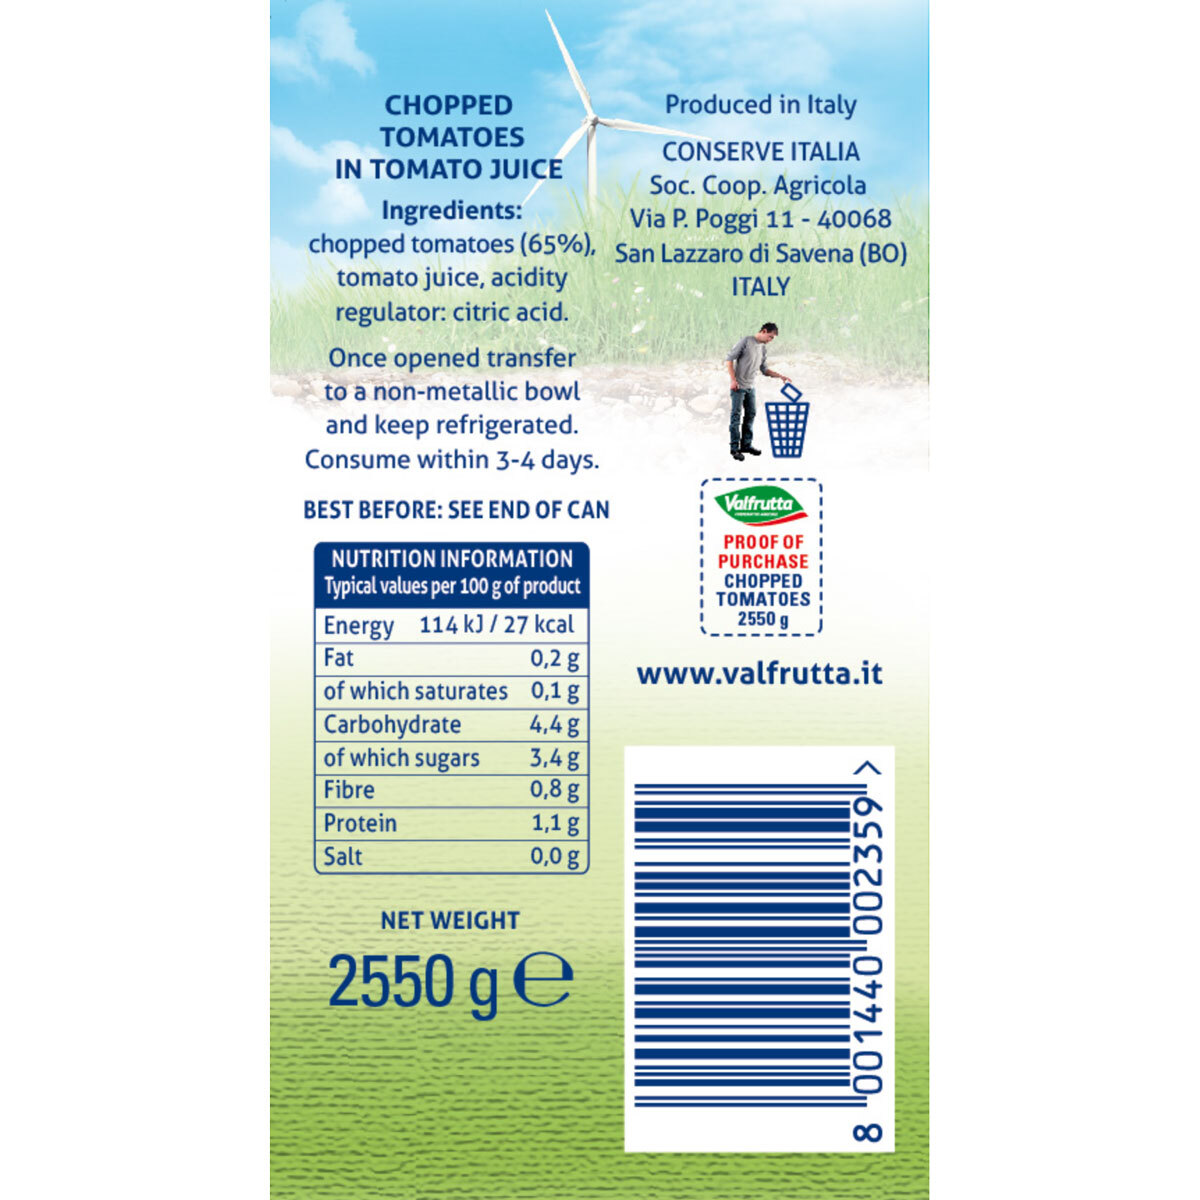 Back of pack image showing ingredients and nutritional information